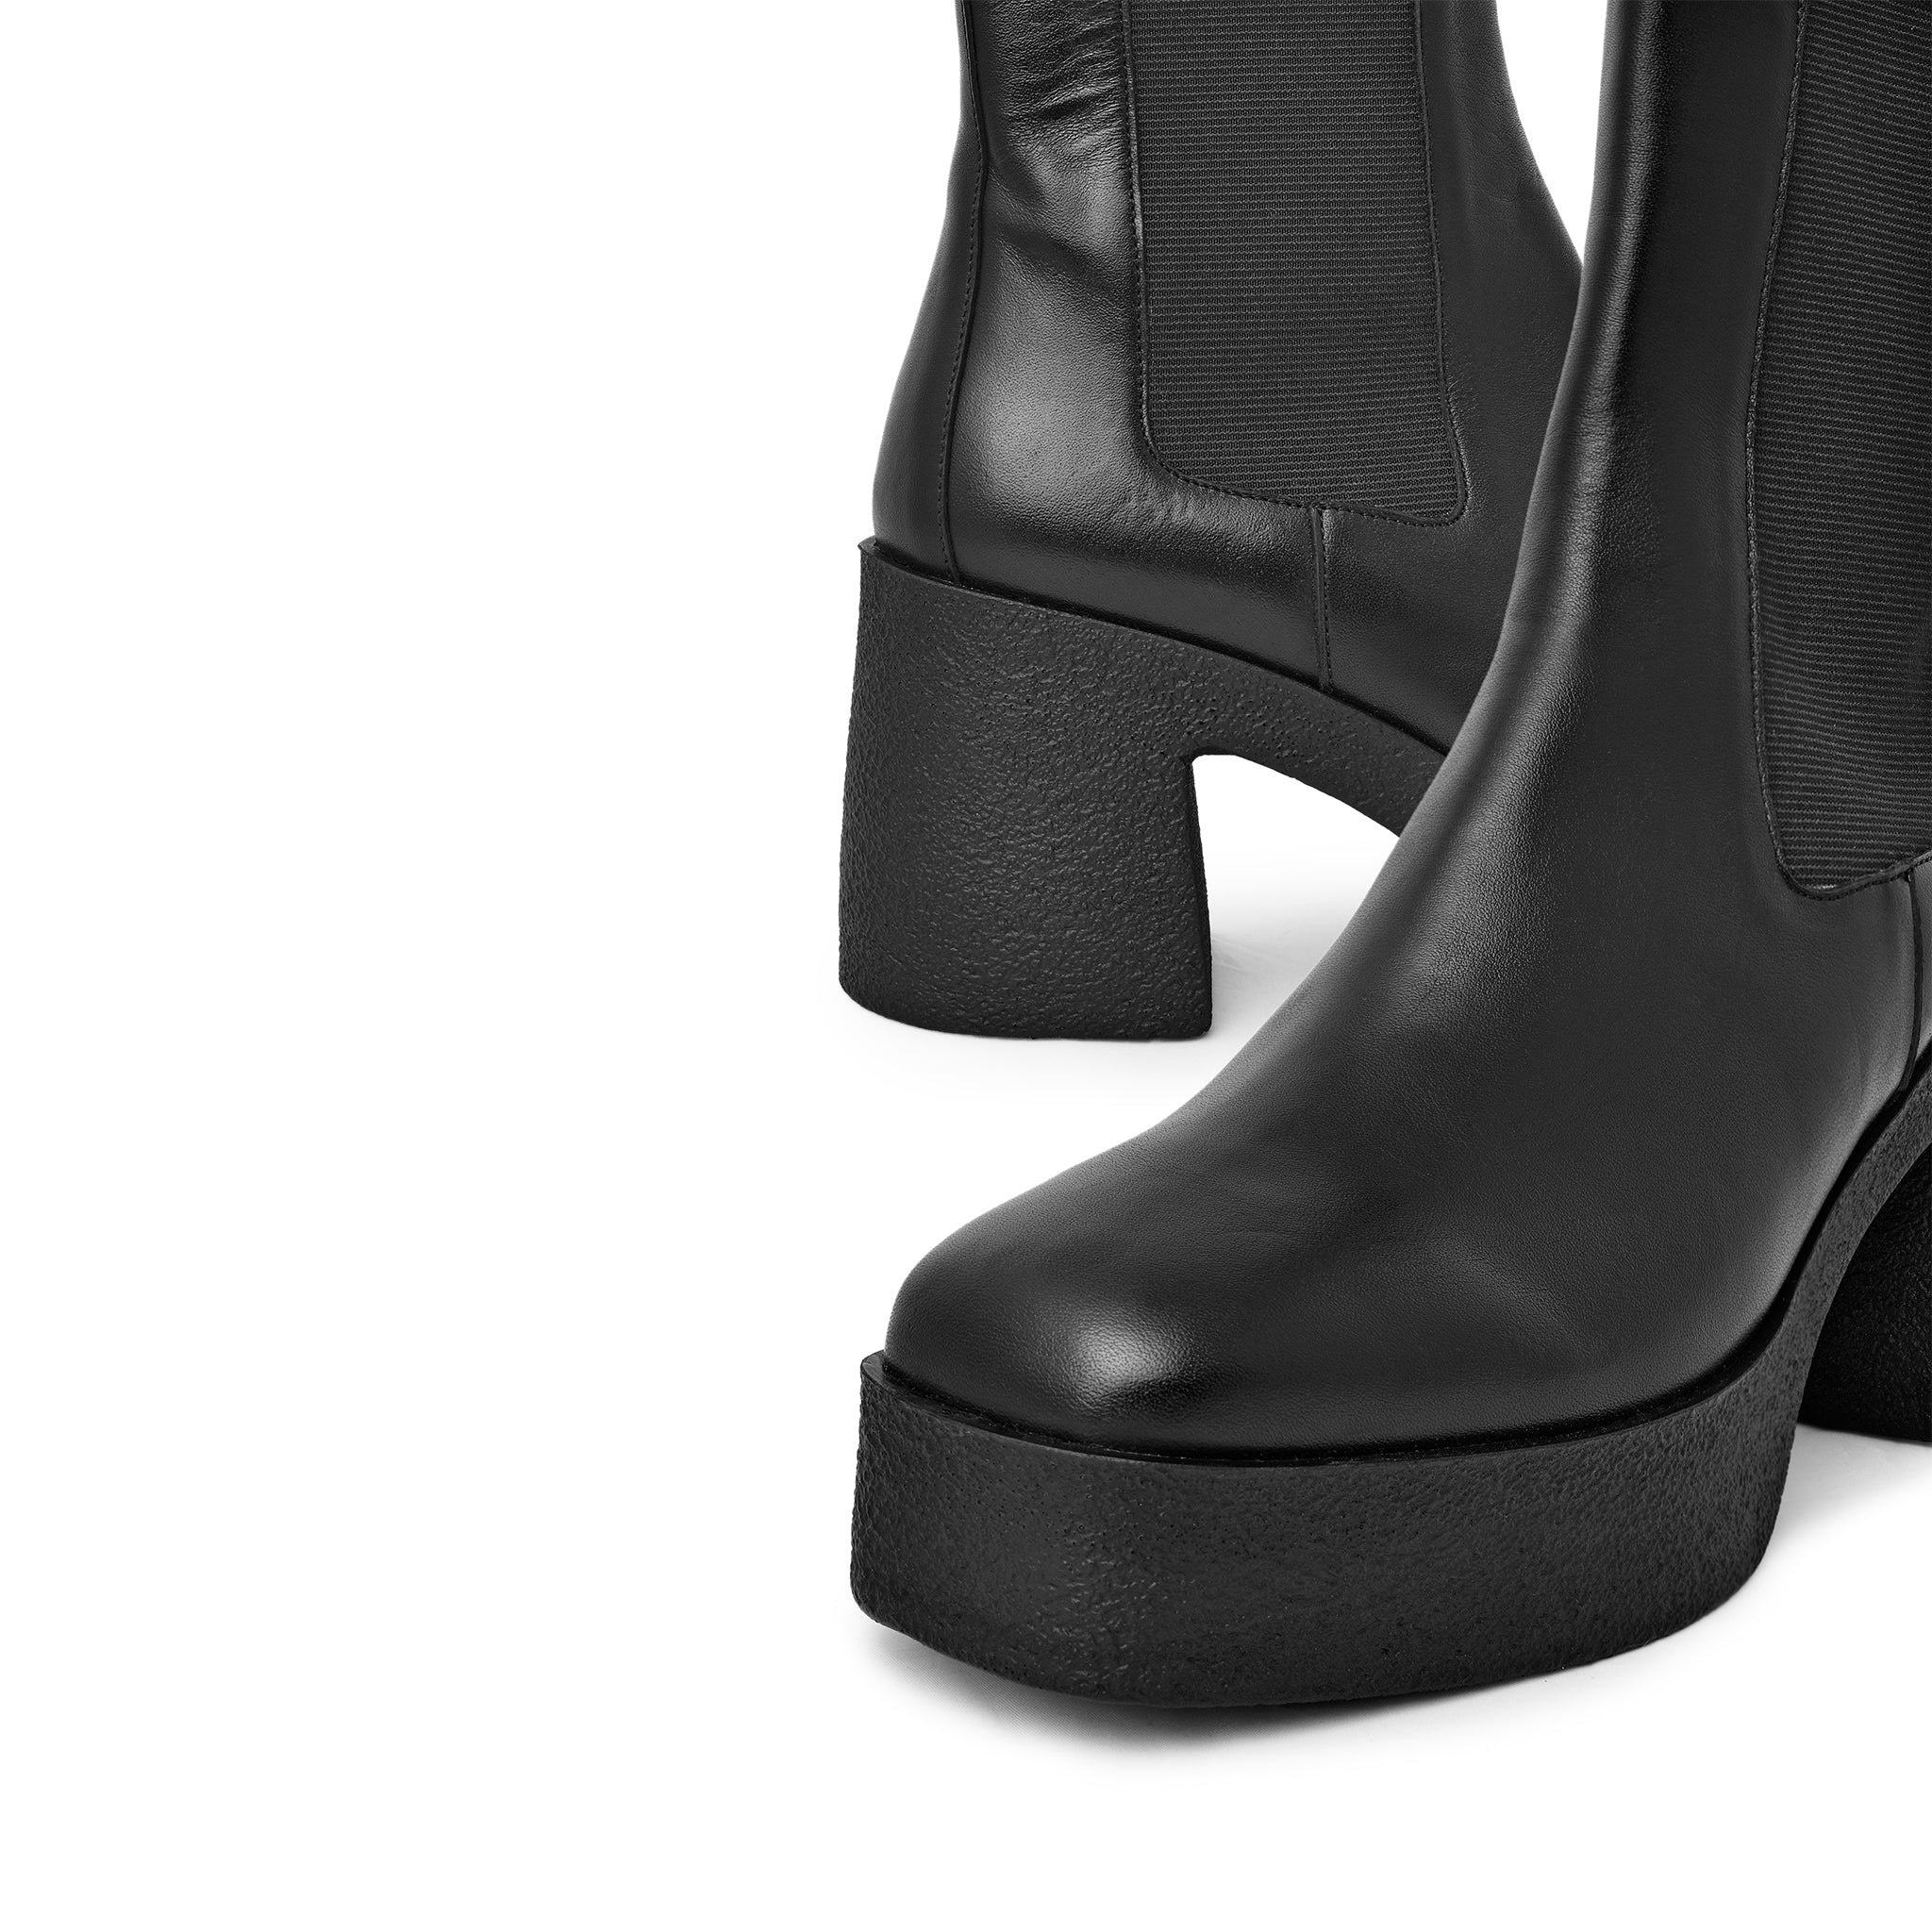 Momo Black Leather Chelsea Boots 20077-04-01 - 12